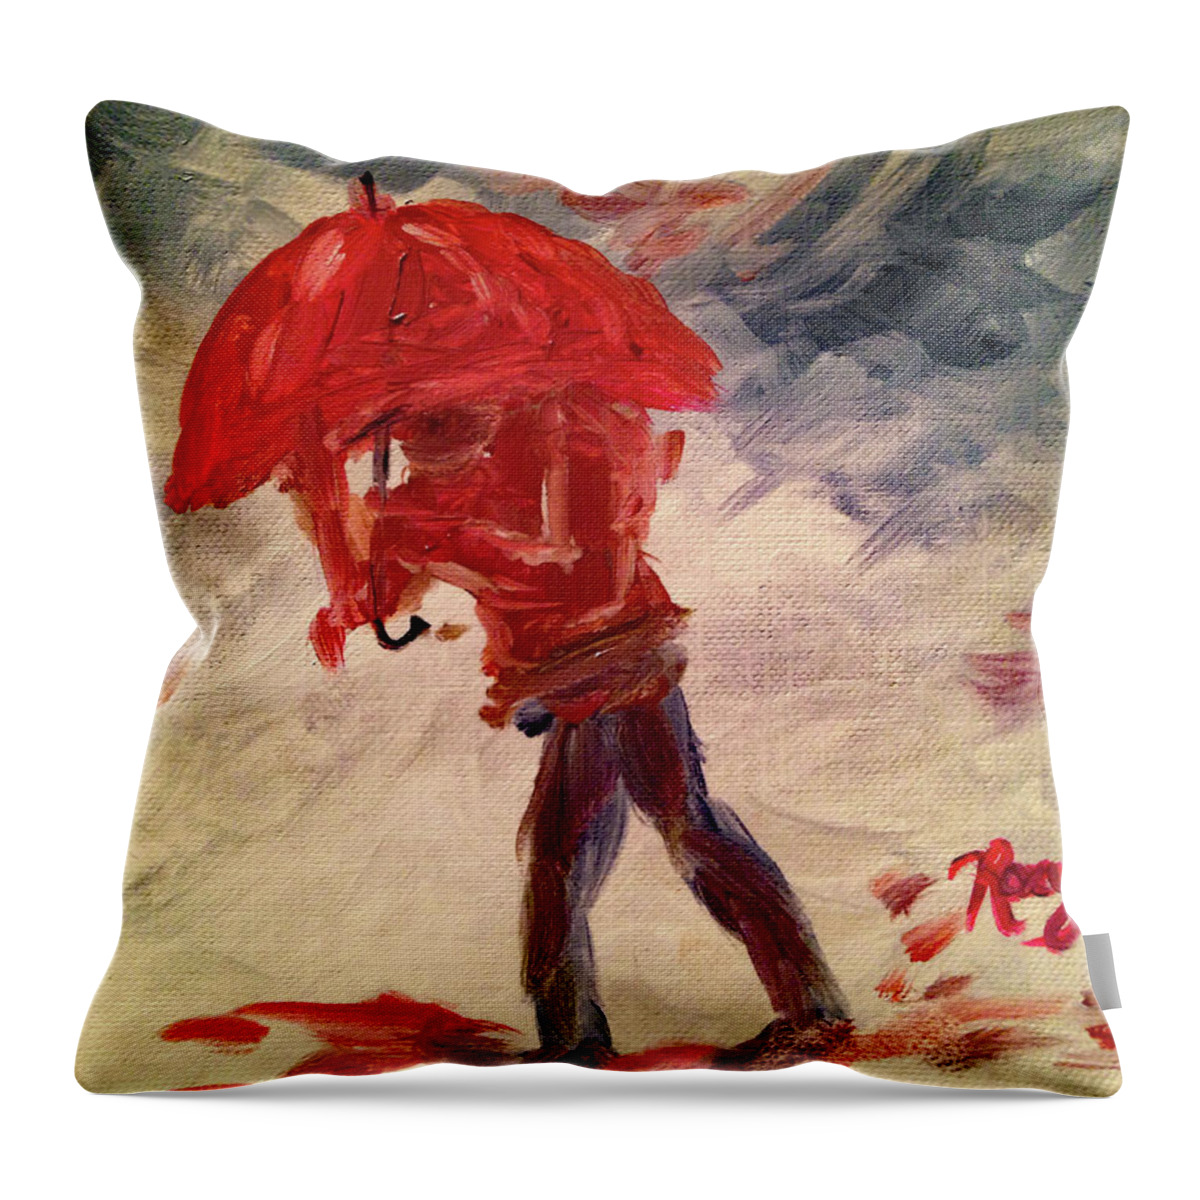 Rain Throw Pillow featuring the painting Caught by Roxy Rich